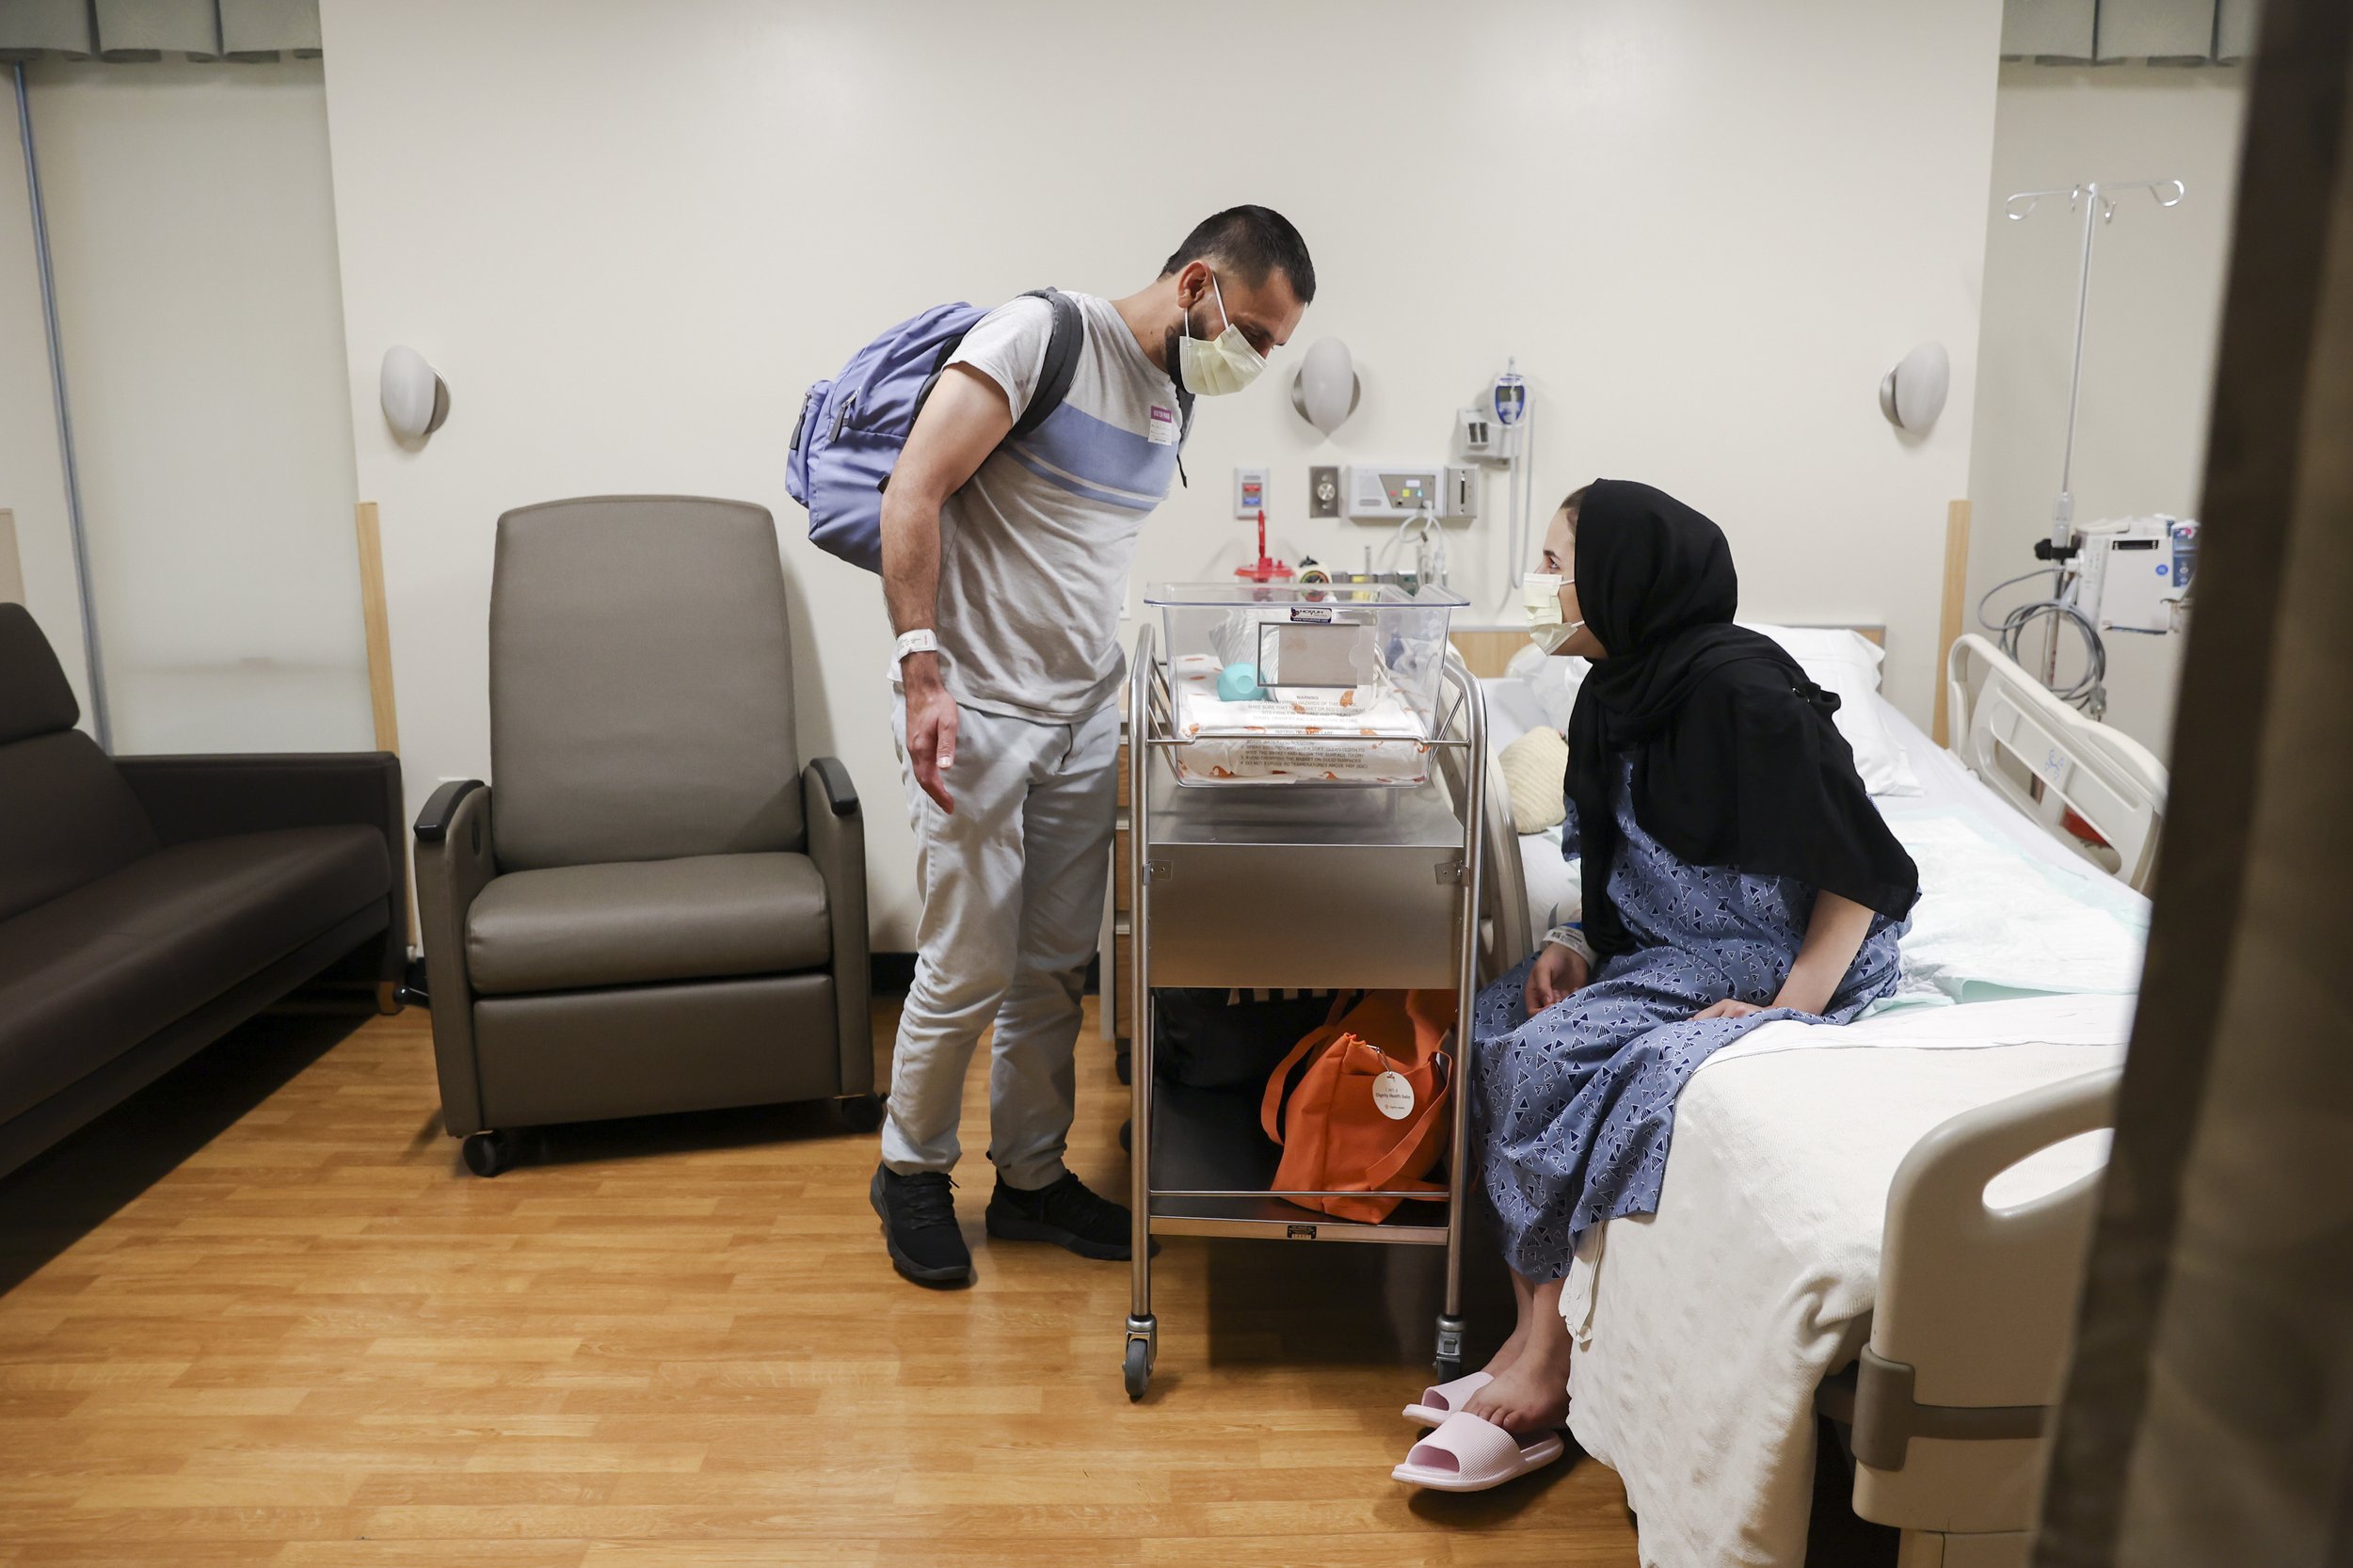  Najibullah Mohammadi and his wife Susan look at their newborn son, Yusuf Mohammadi, as he lays in his crib at Mercy San Juan Hospital on Thursday, May 12, 2022. After spending over an hour at the Sutter Hospital, the Mohammadi family was informed th